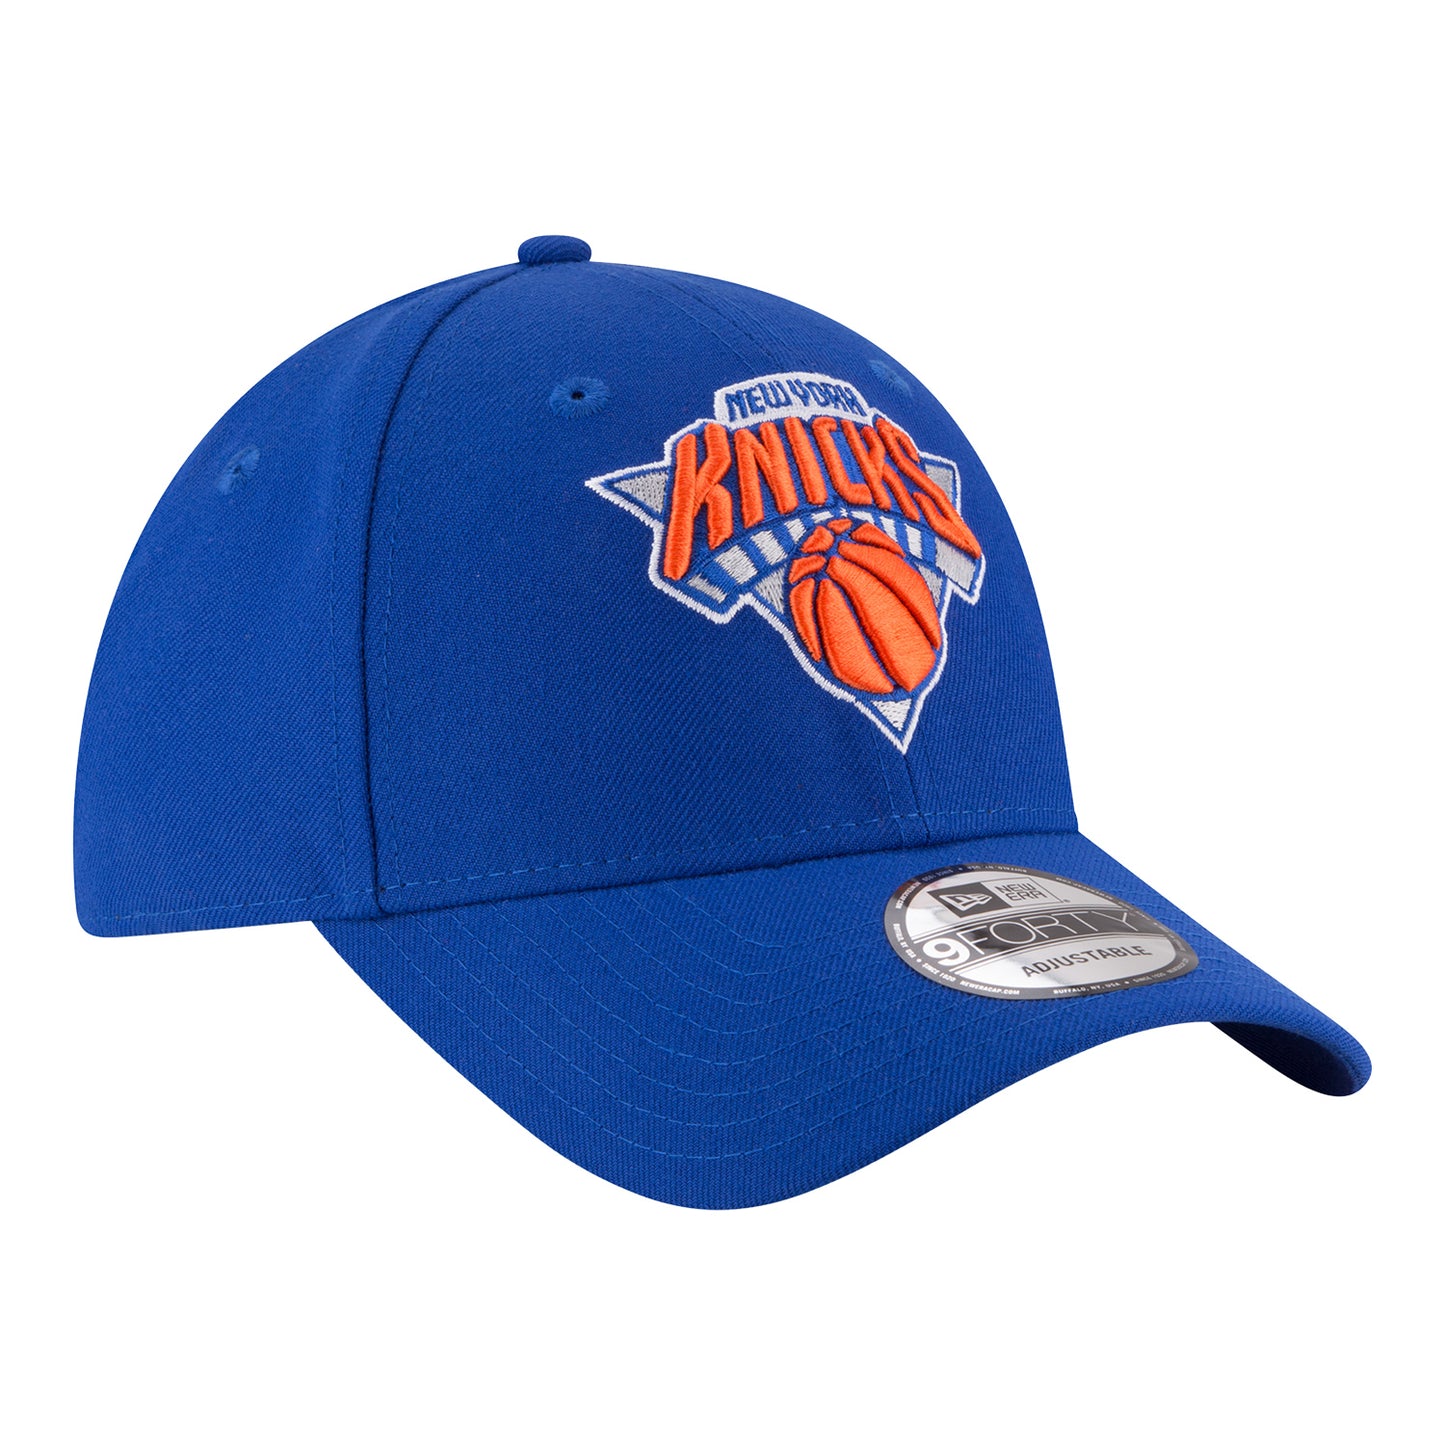 Youth New Era Knicks Royal 9Forty Hat - In Blue - Right View